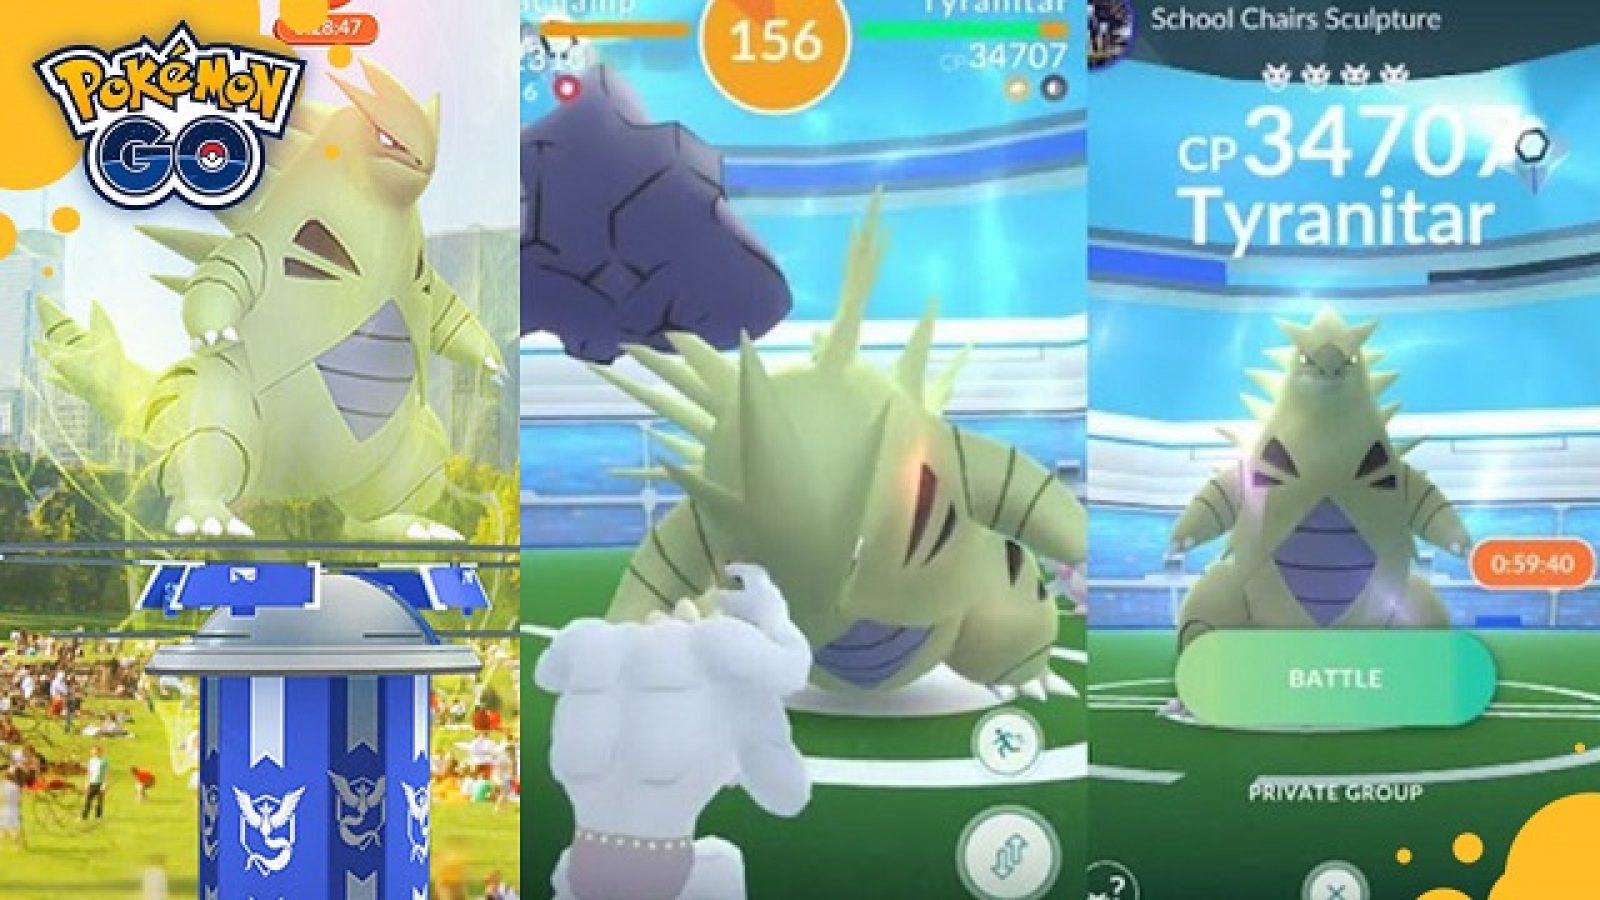 Pokémon GO players: Which one are you?